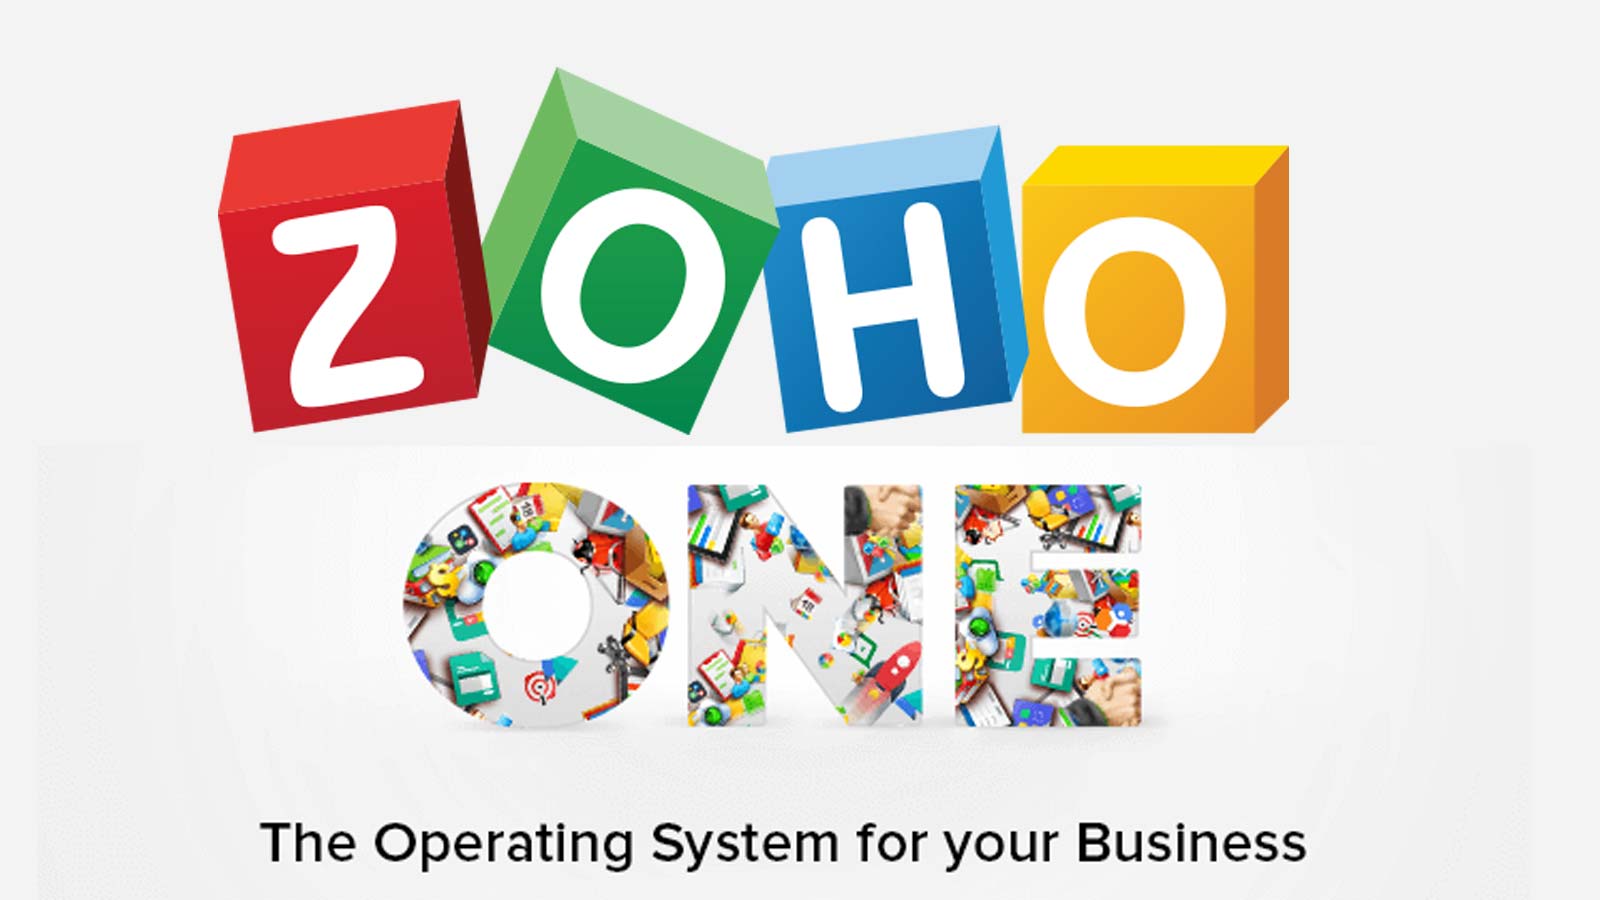 Zoho working on building its own OS for laptops